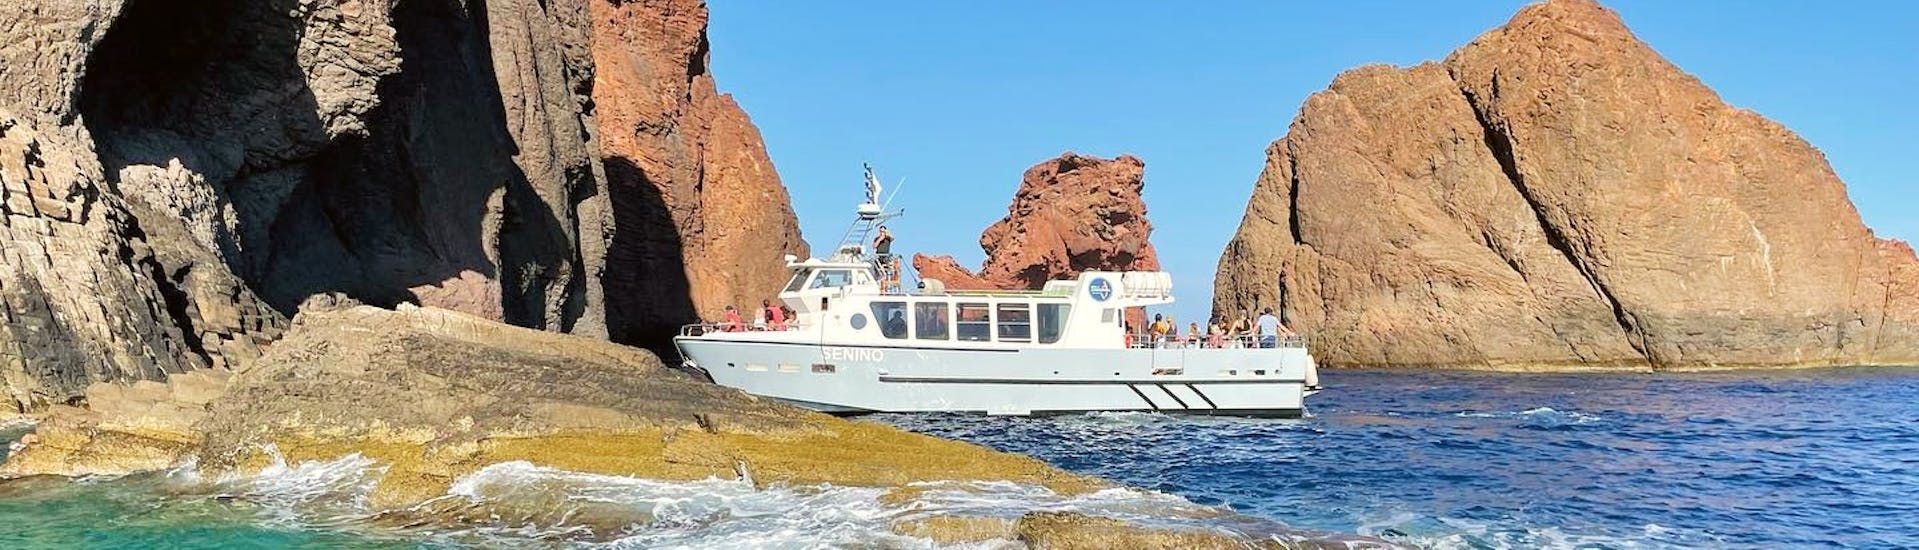 People are doing a Boat Trip to Piana & Scandola with Stopover in Girolata with Isula Croisières Corse.